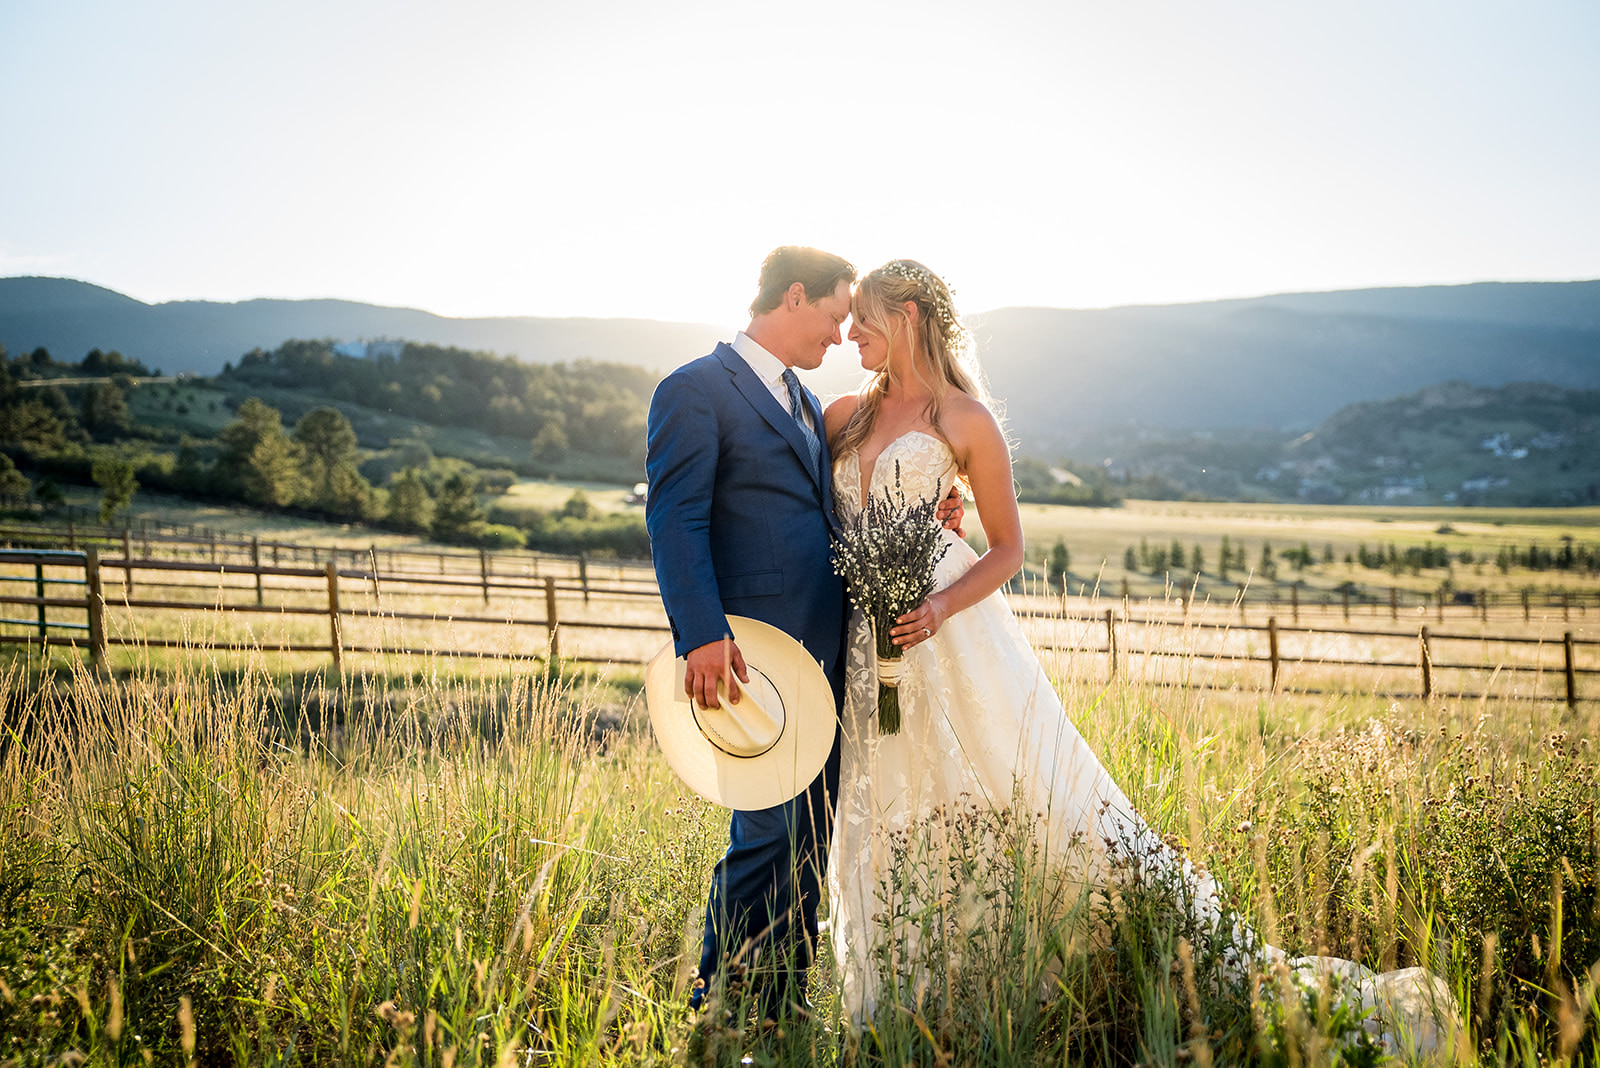 Bride and groom stand in a green pasture with mountain views and the sun setting behind them.